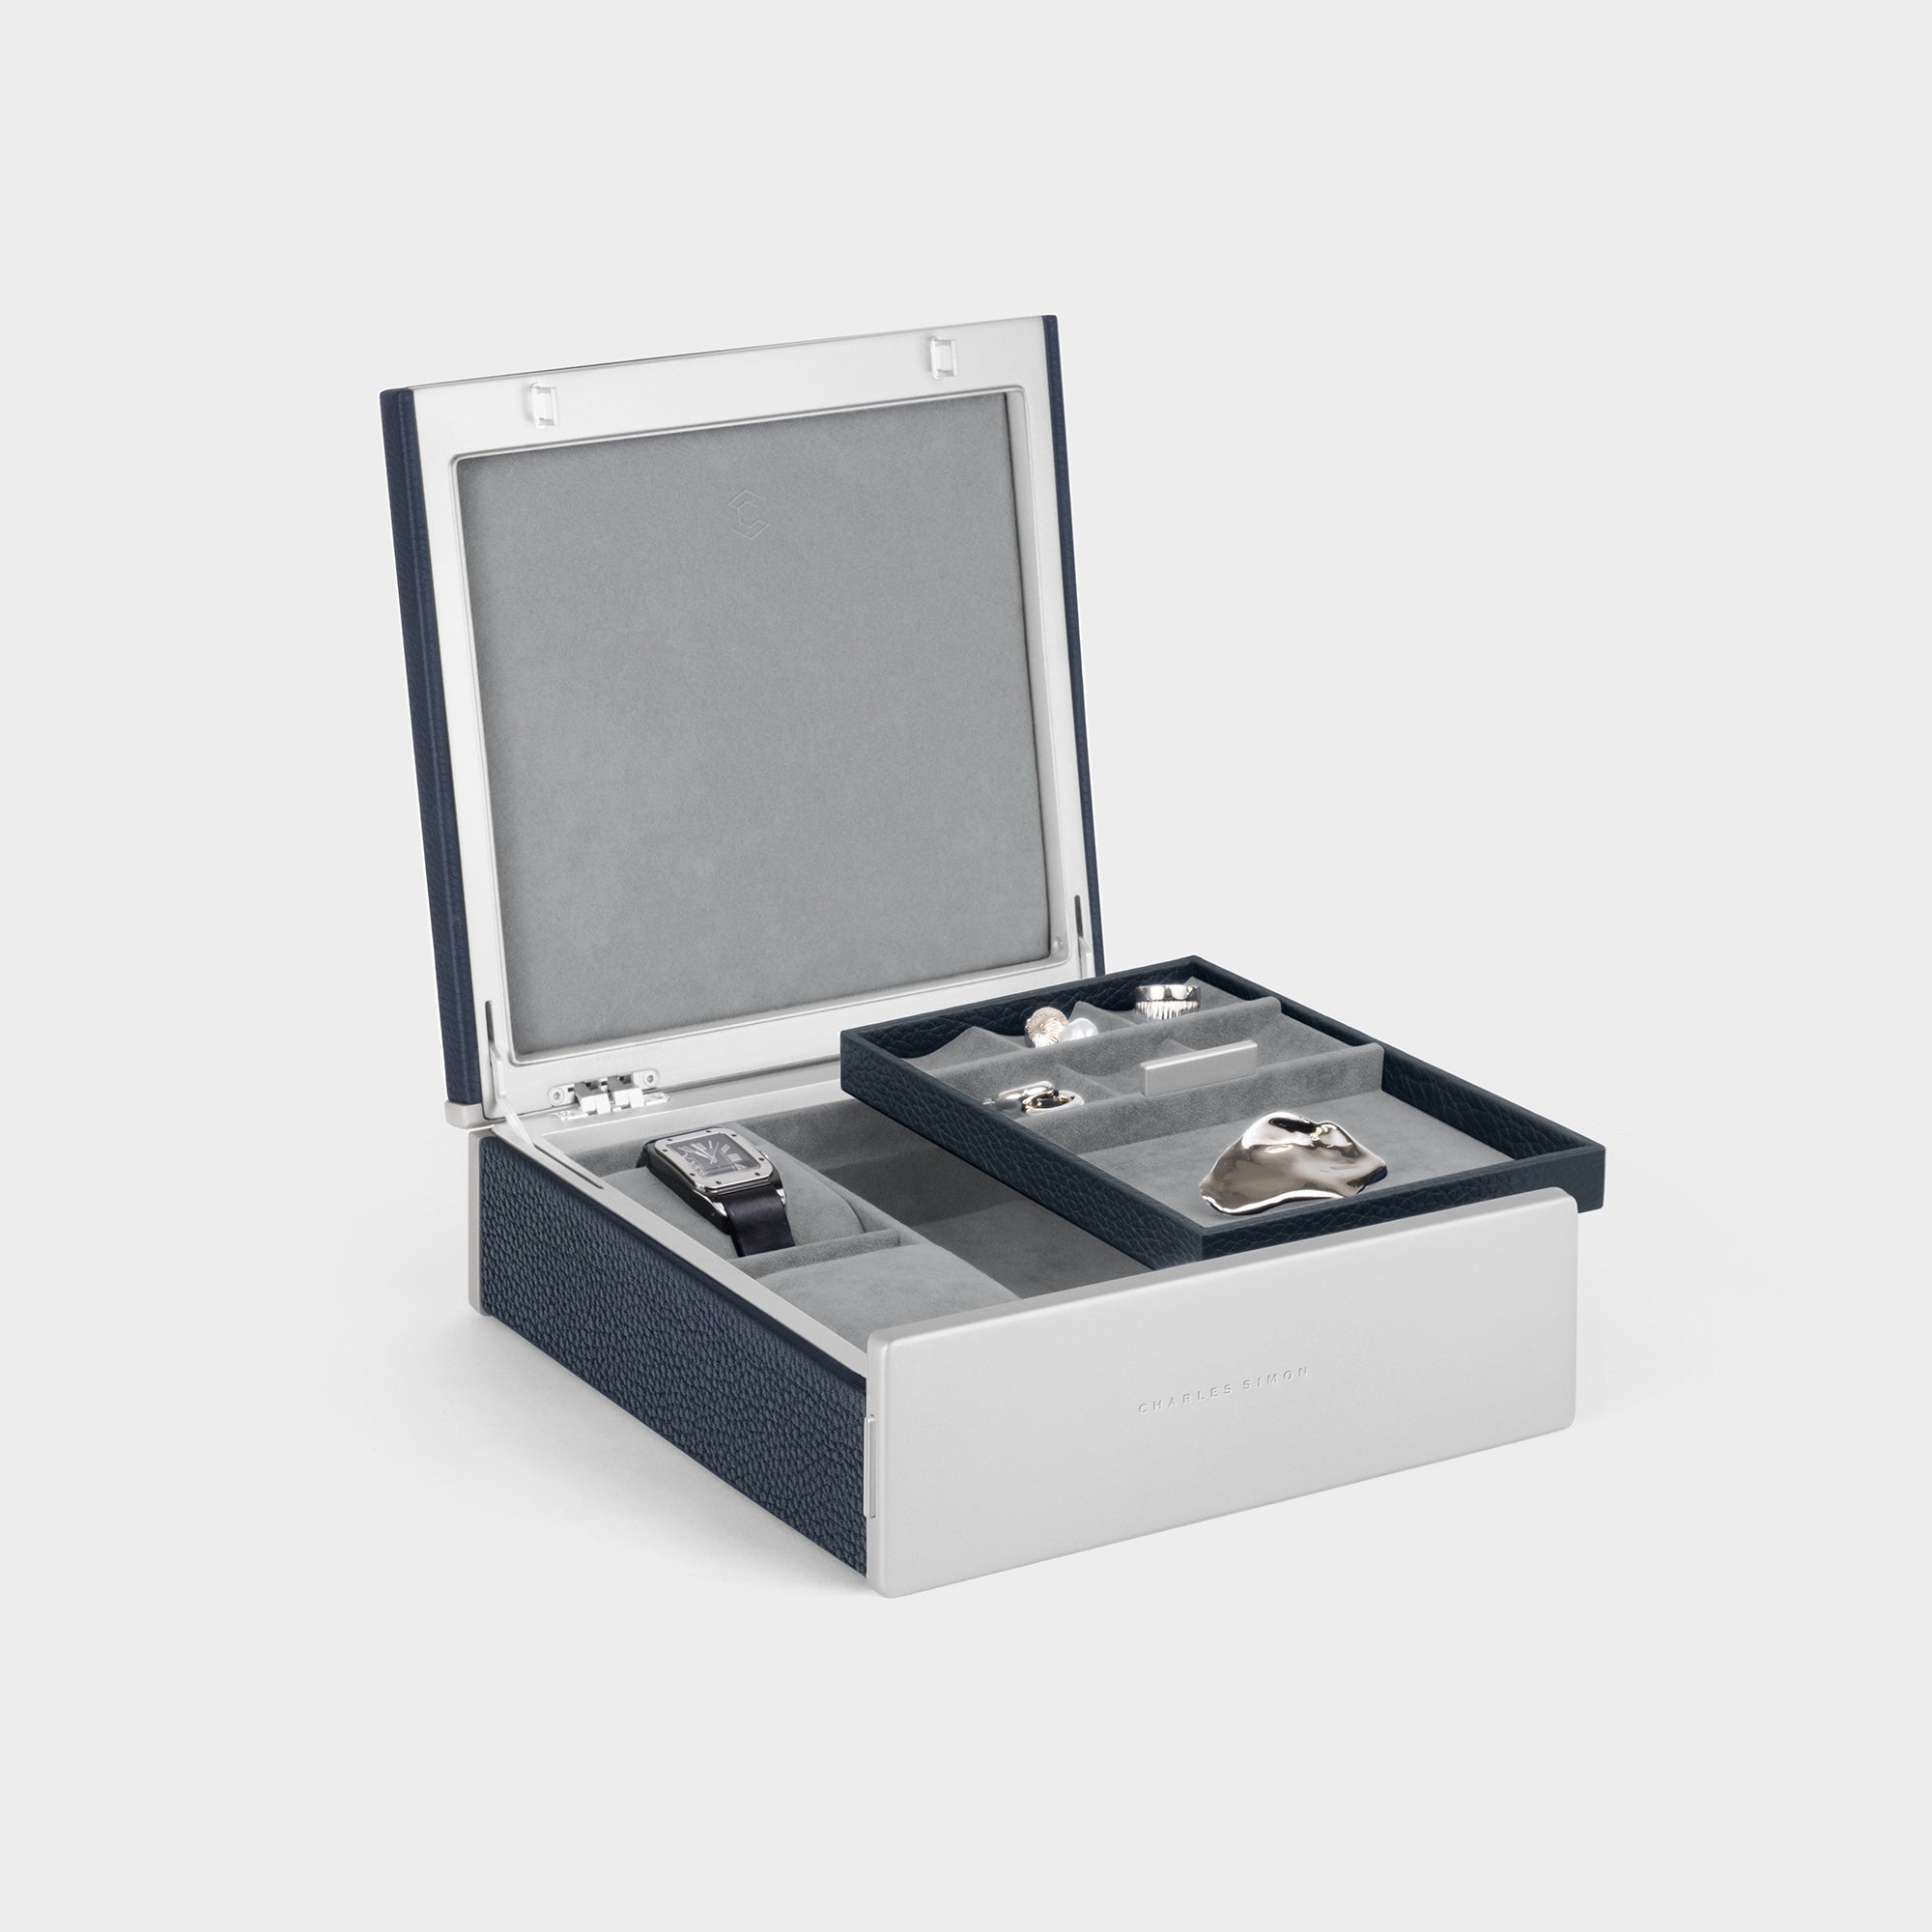 Open Taylor 2 Watch and Jewelry box showcasing the boxe's jewelry tray for storing and organizing your rings, earrings, bracelets and more